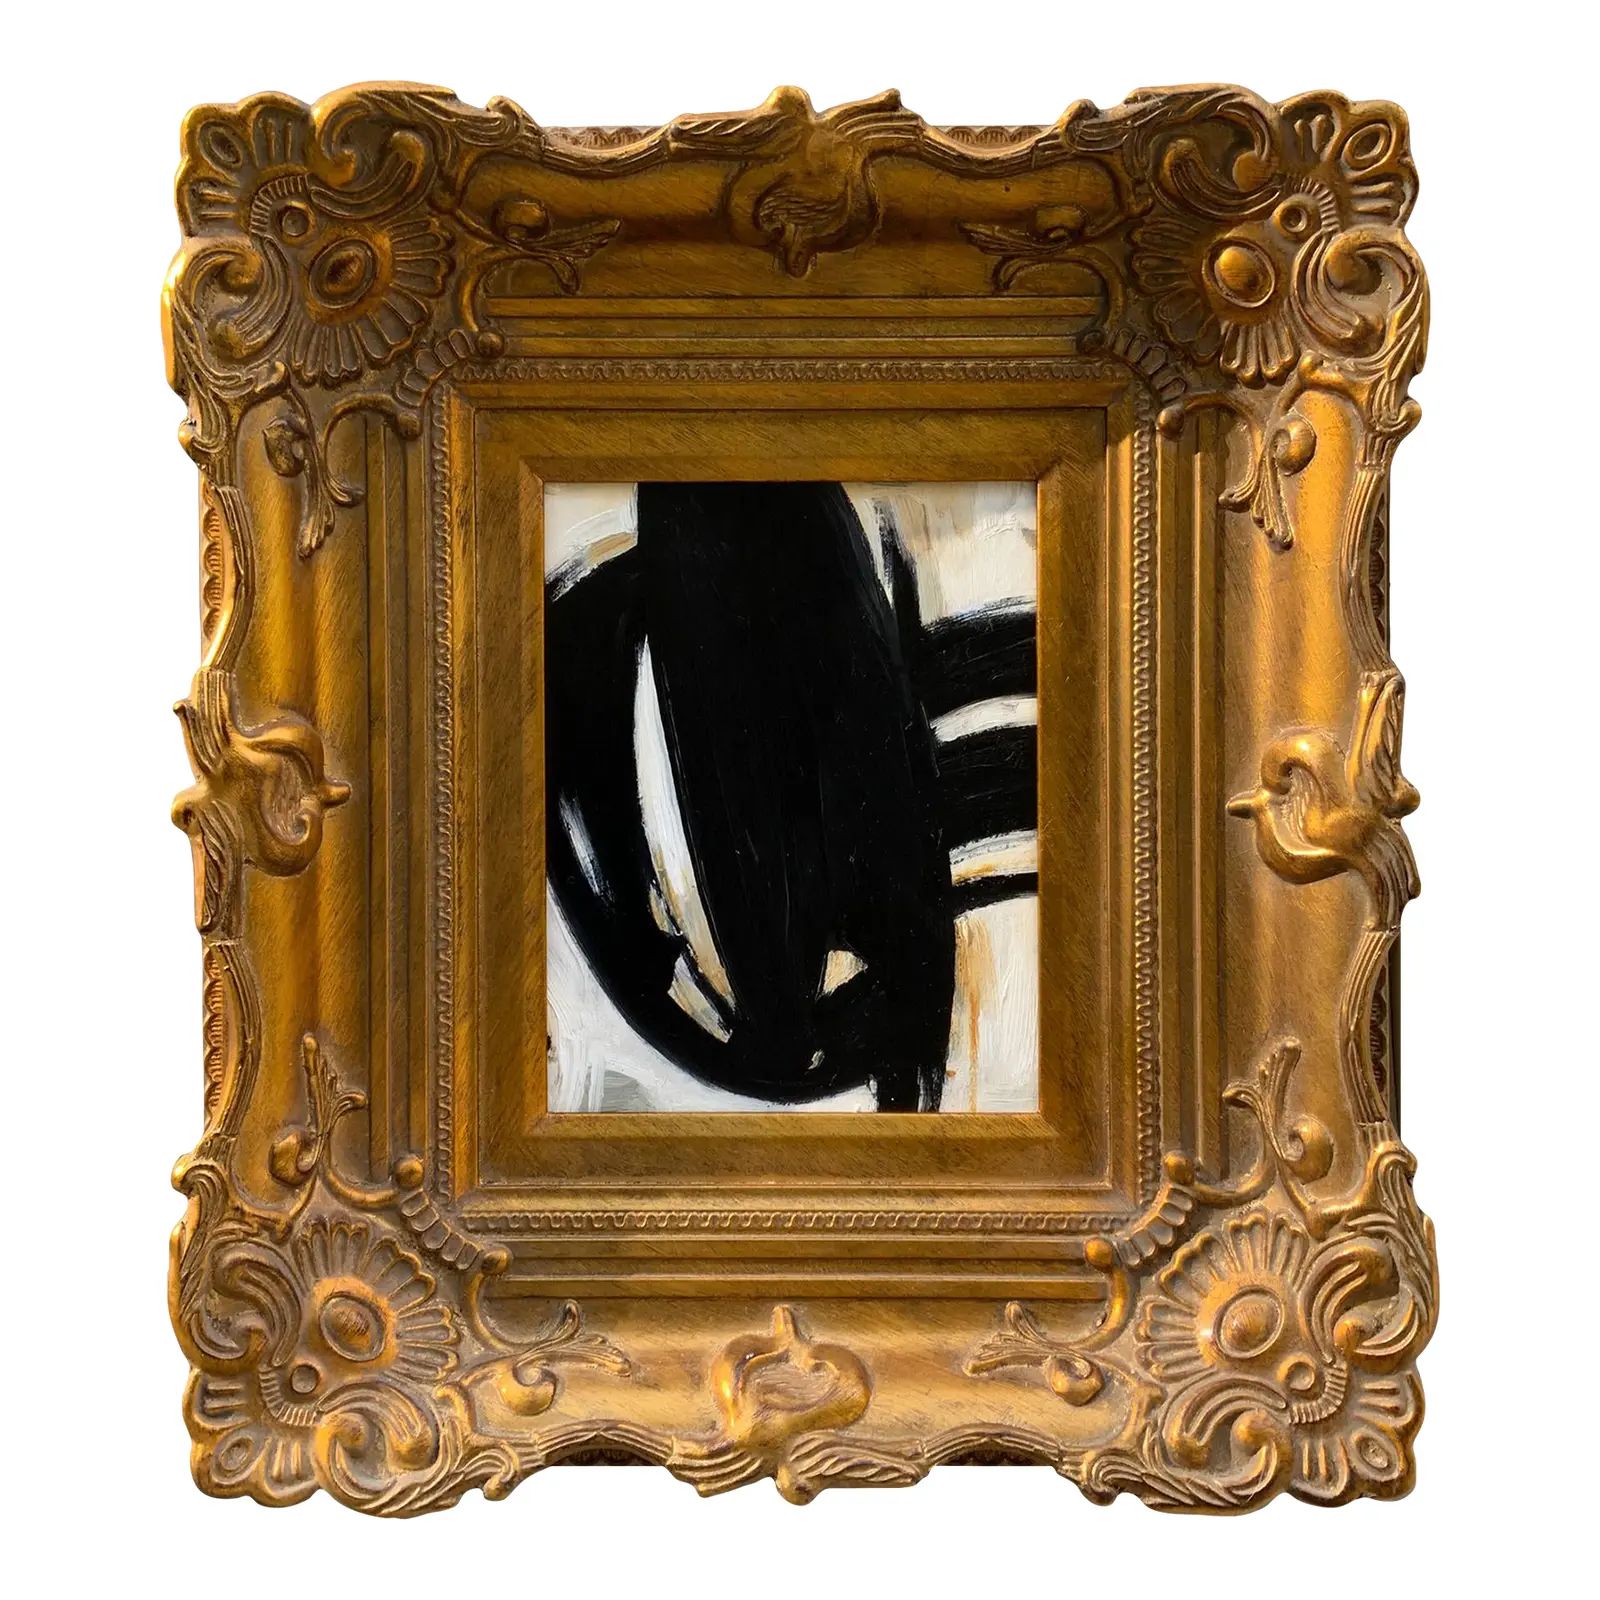 Contemporary Abstract Black and White Painting in Vintage Gold Frame | Chairish